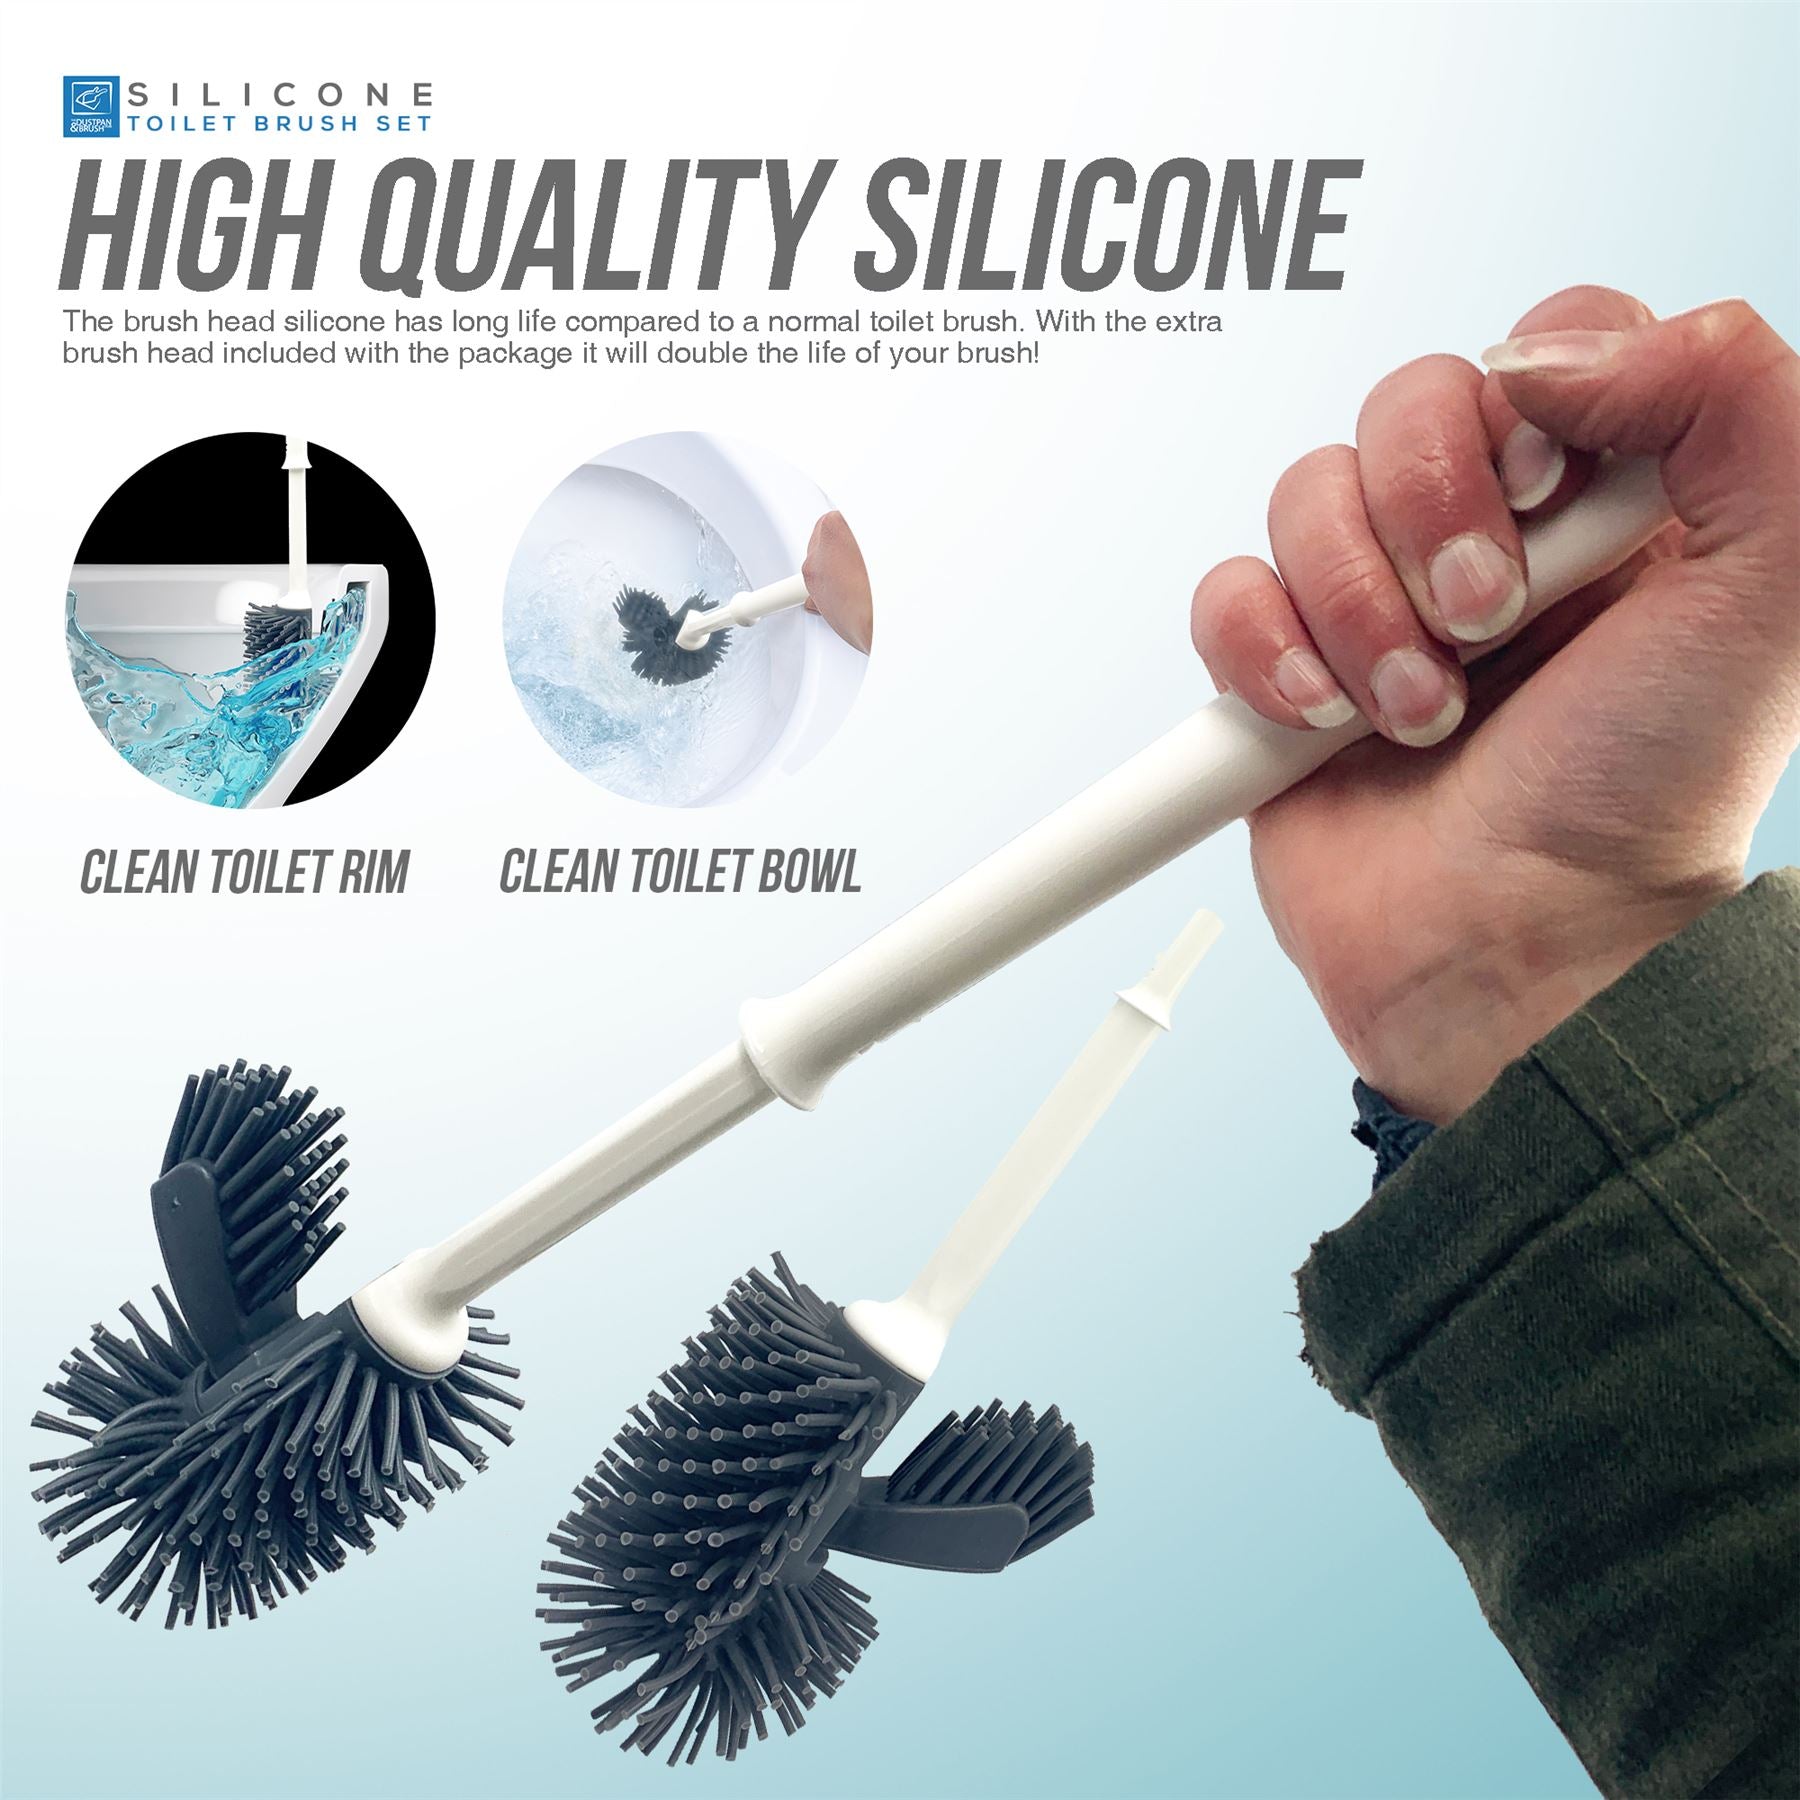 Silicone Toilet Brush Set with Spare Brush Head